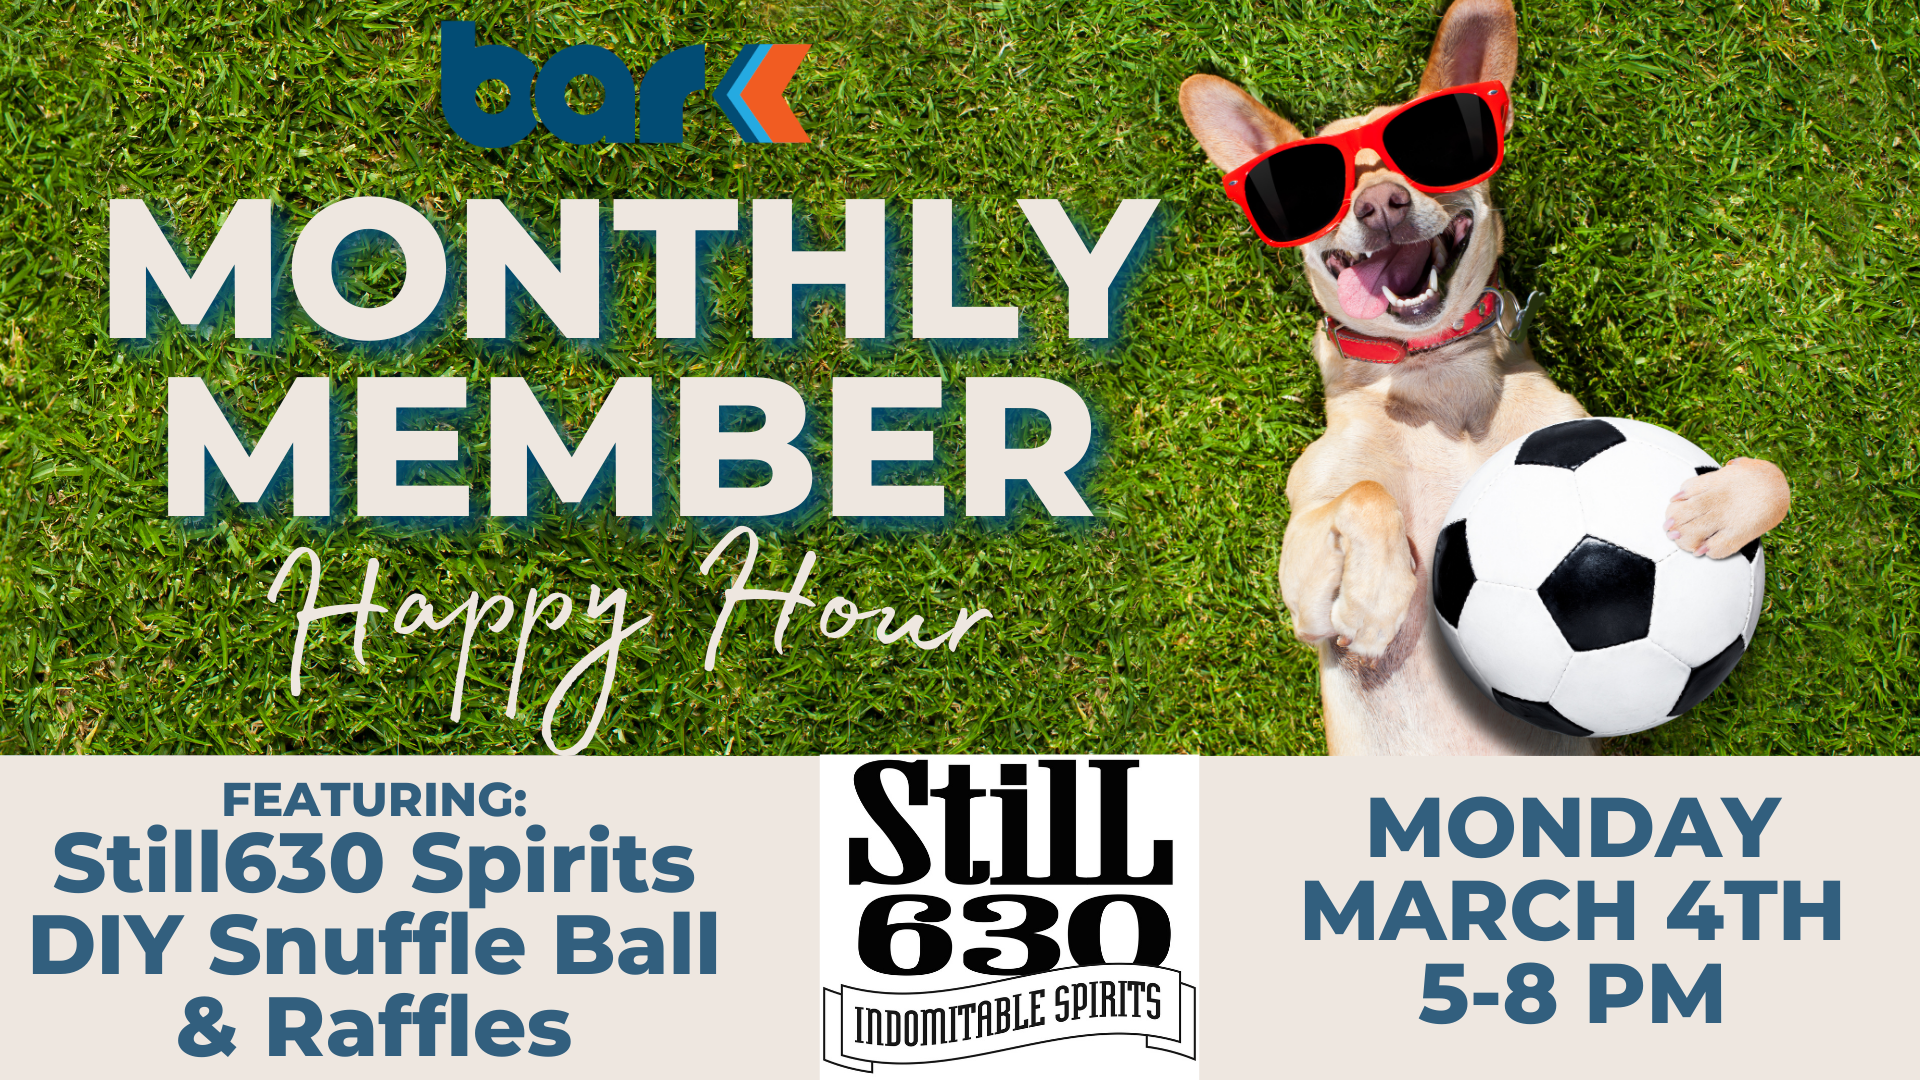 Bar K monthly member happy hour. Featuring Still630 spirits, DIY Snuffle ball, and raffles. Monday March 4th from 5 to 8 pm.